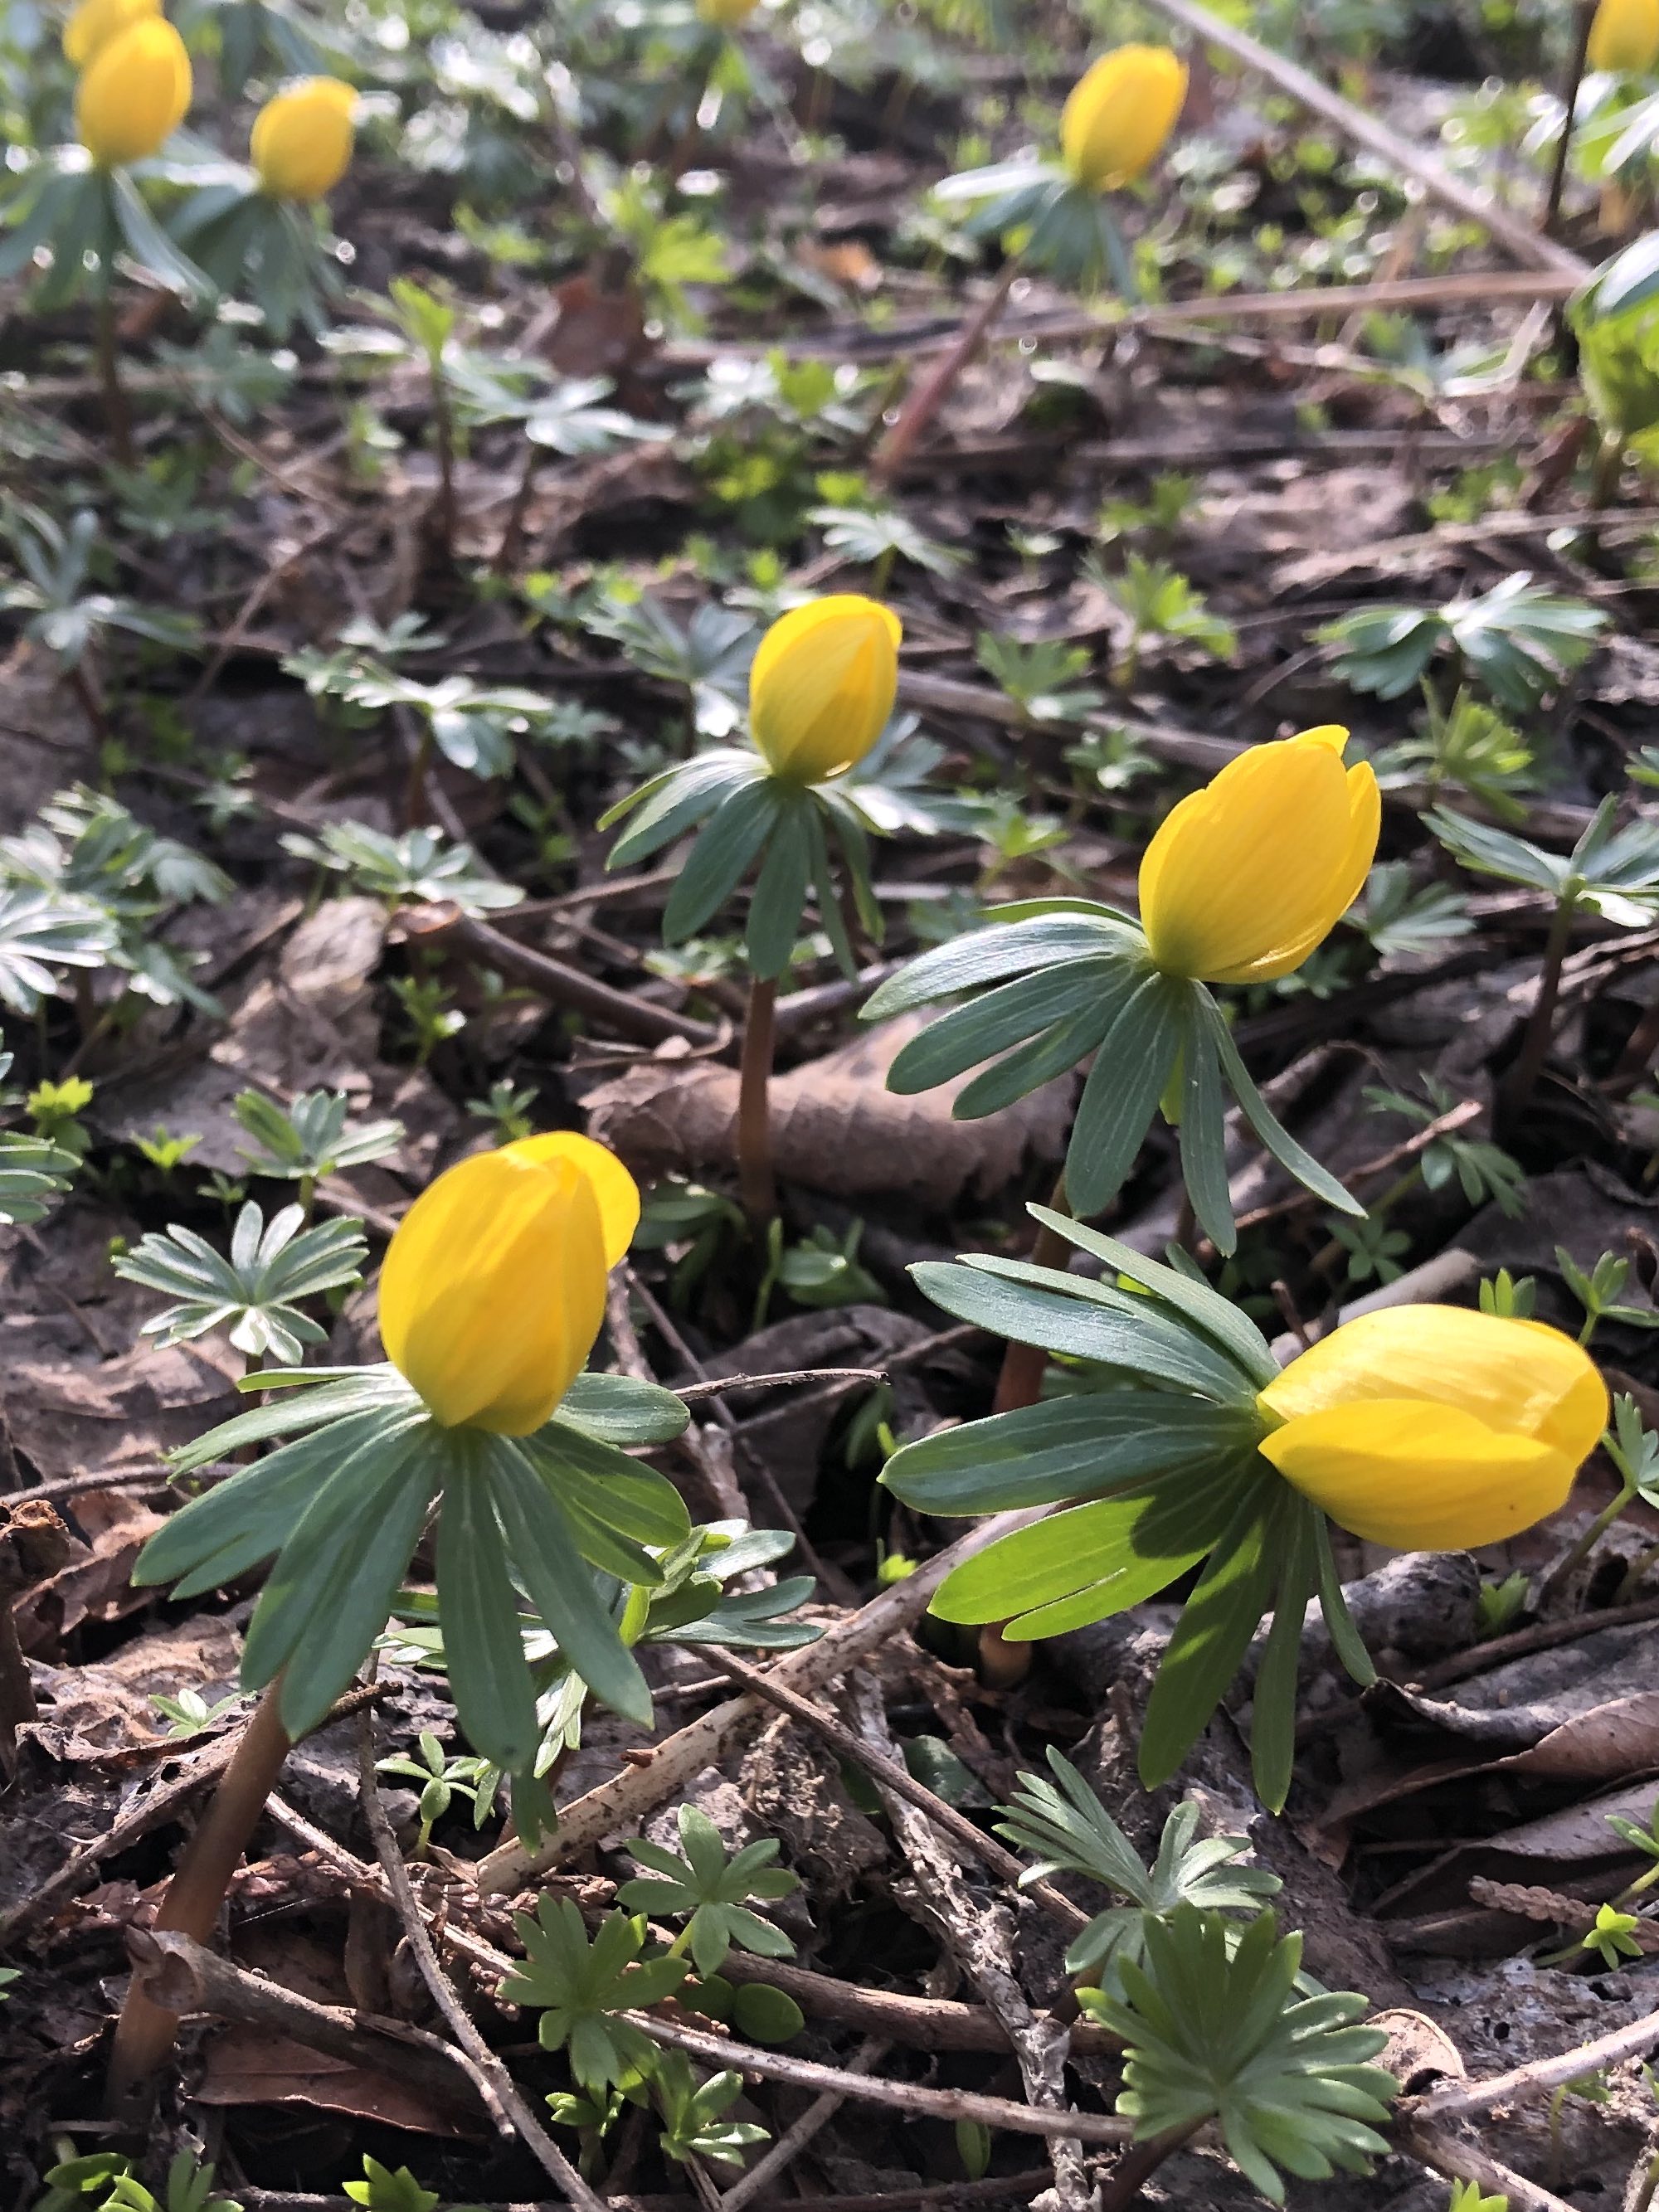 Winter Aconite in yard near the Duck Pond on March 13, 2021.